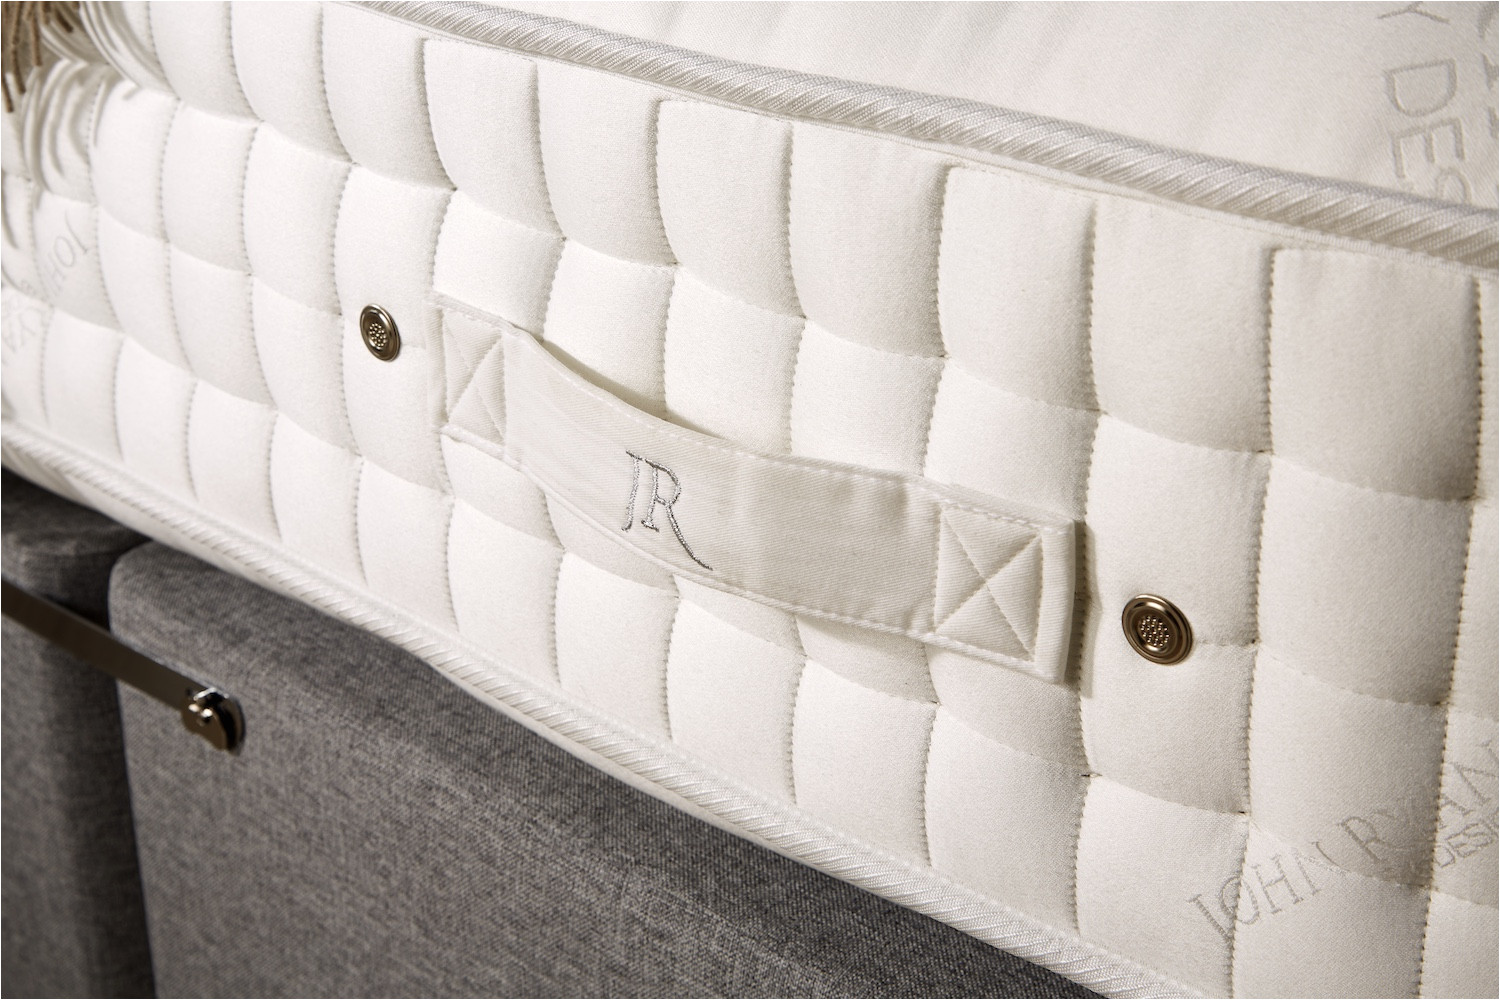 upholstery is the main area that gives a mattress either a soft medium or firm feel not the spring unit